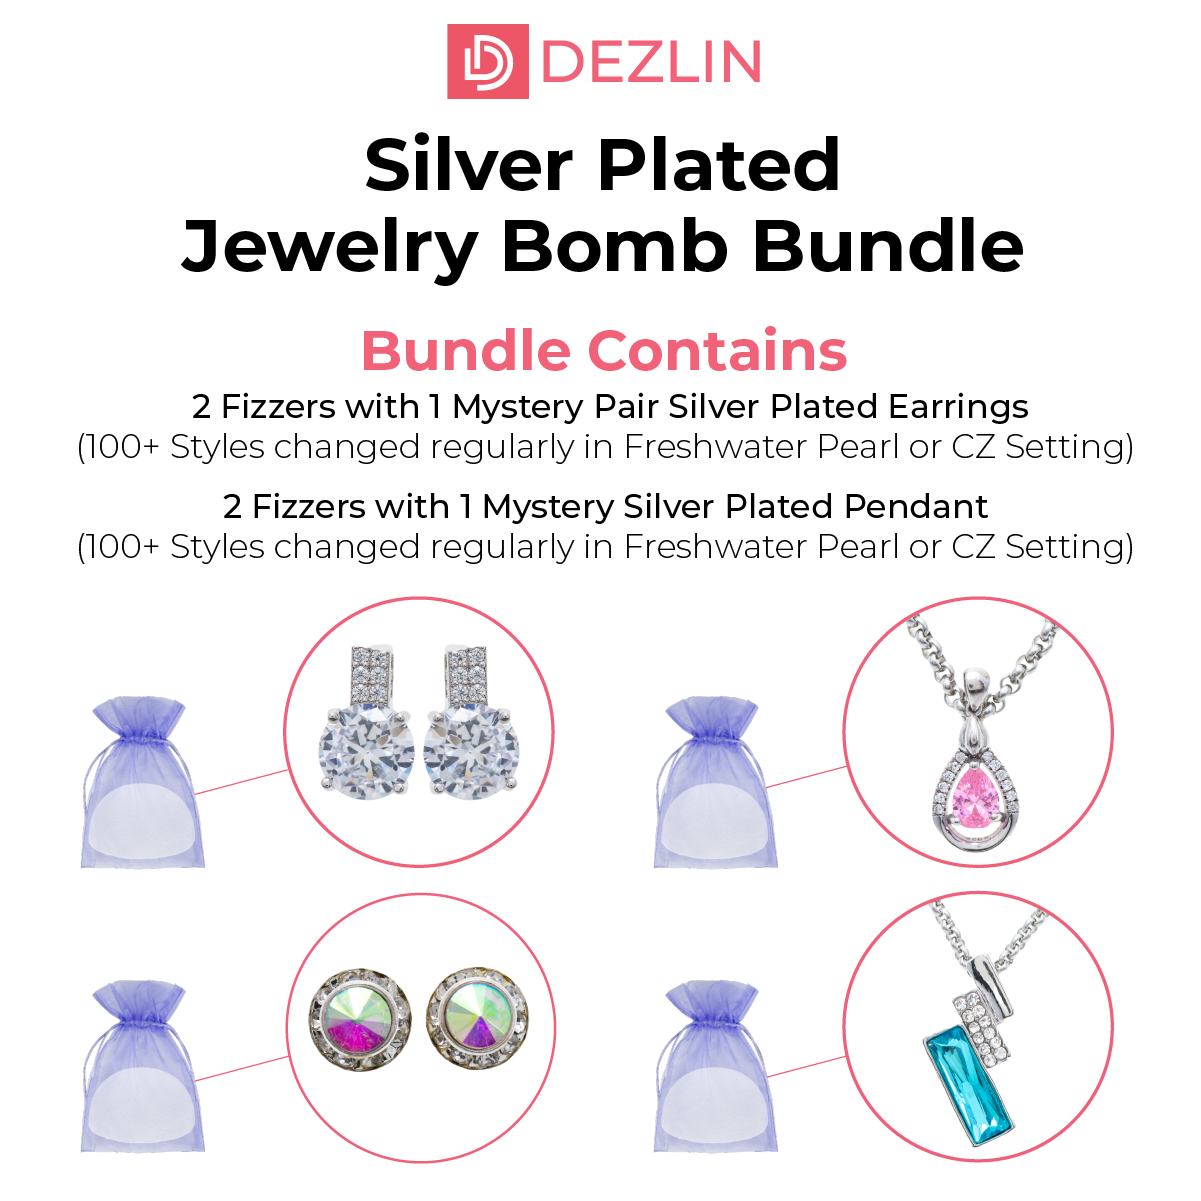 Jewelry Bomb Bundle Silver Plated (4 Bombs)